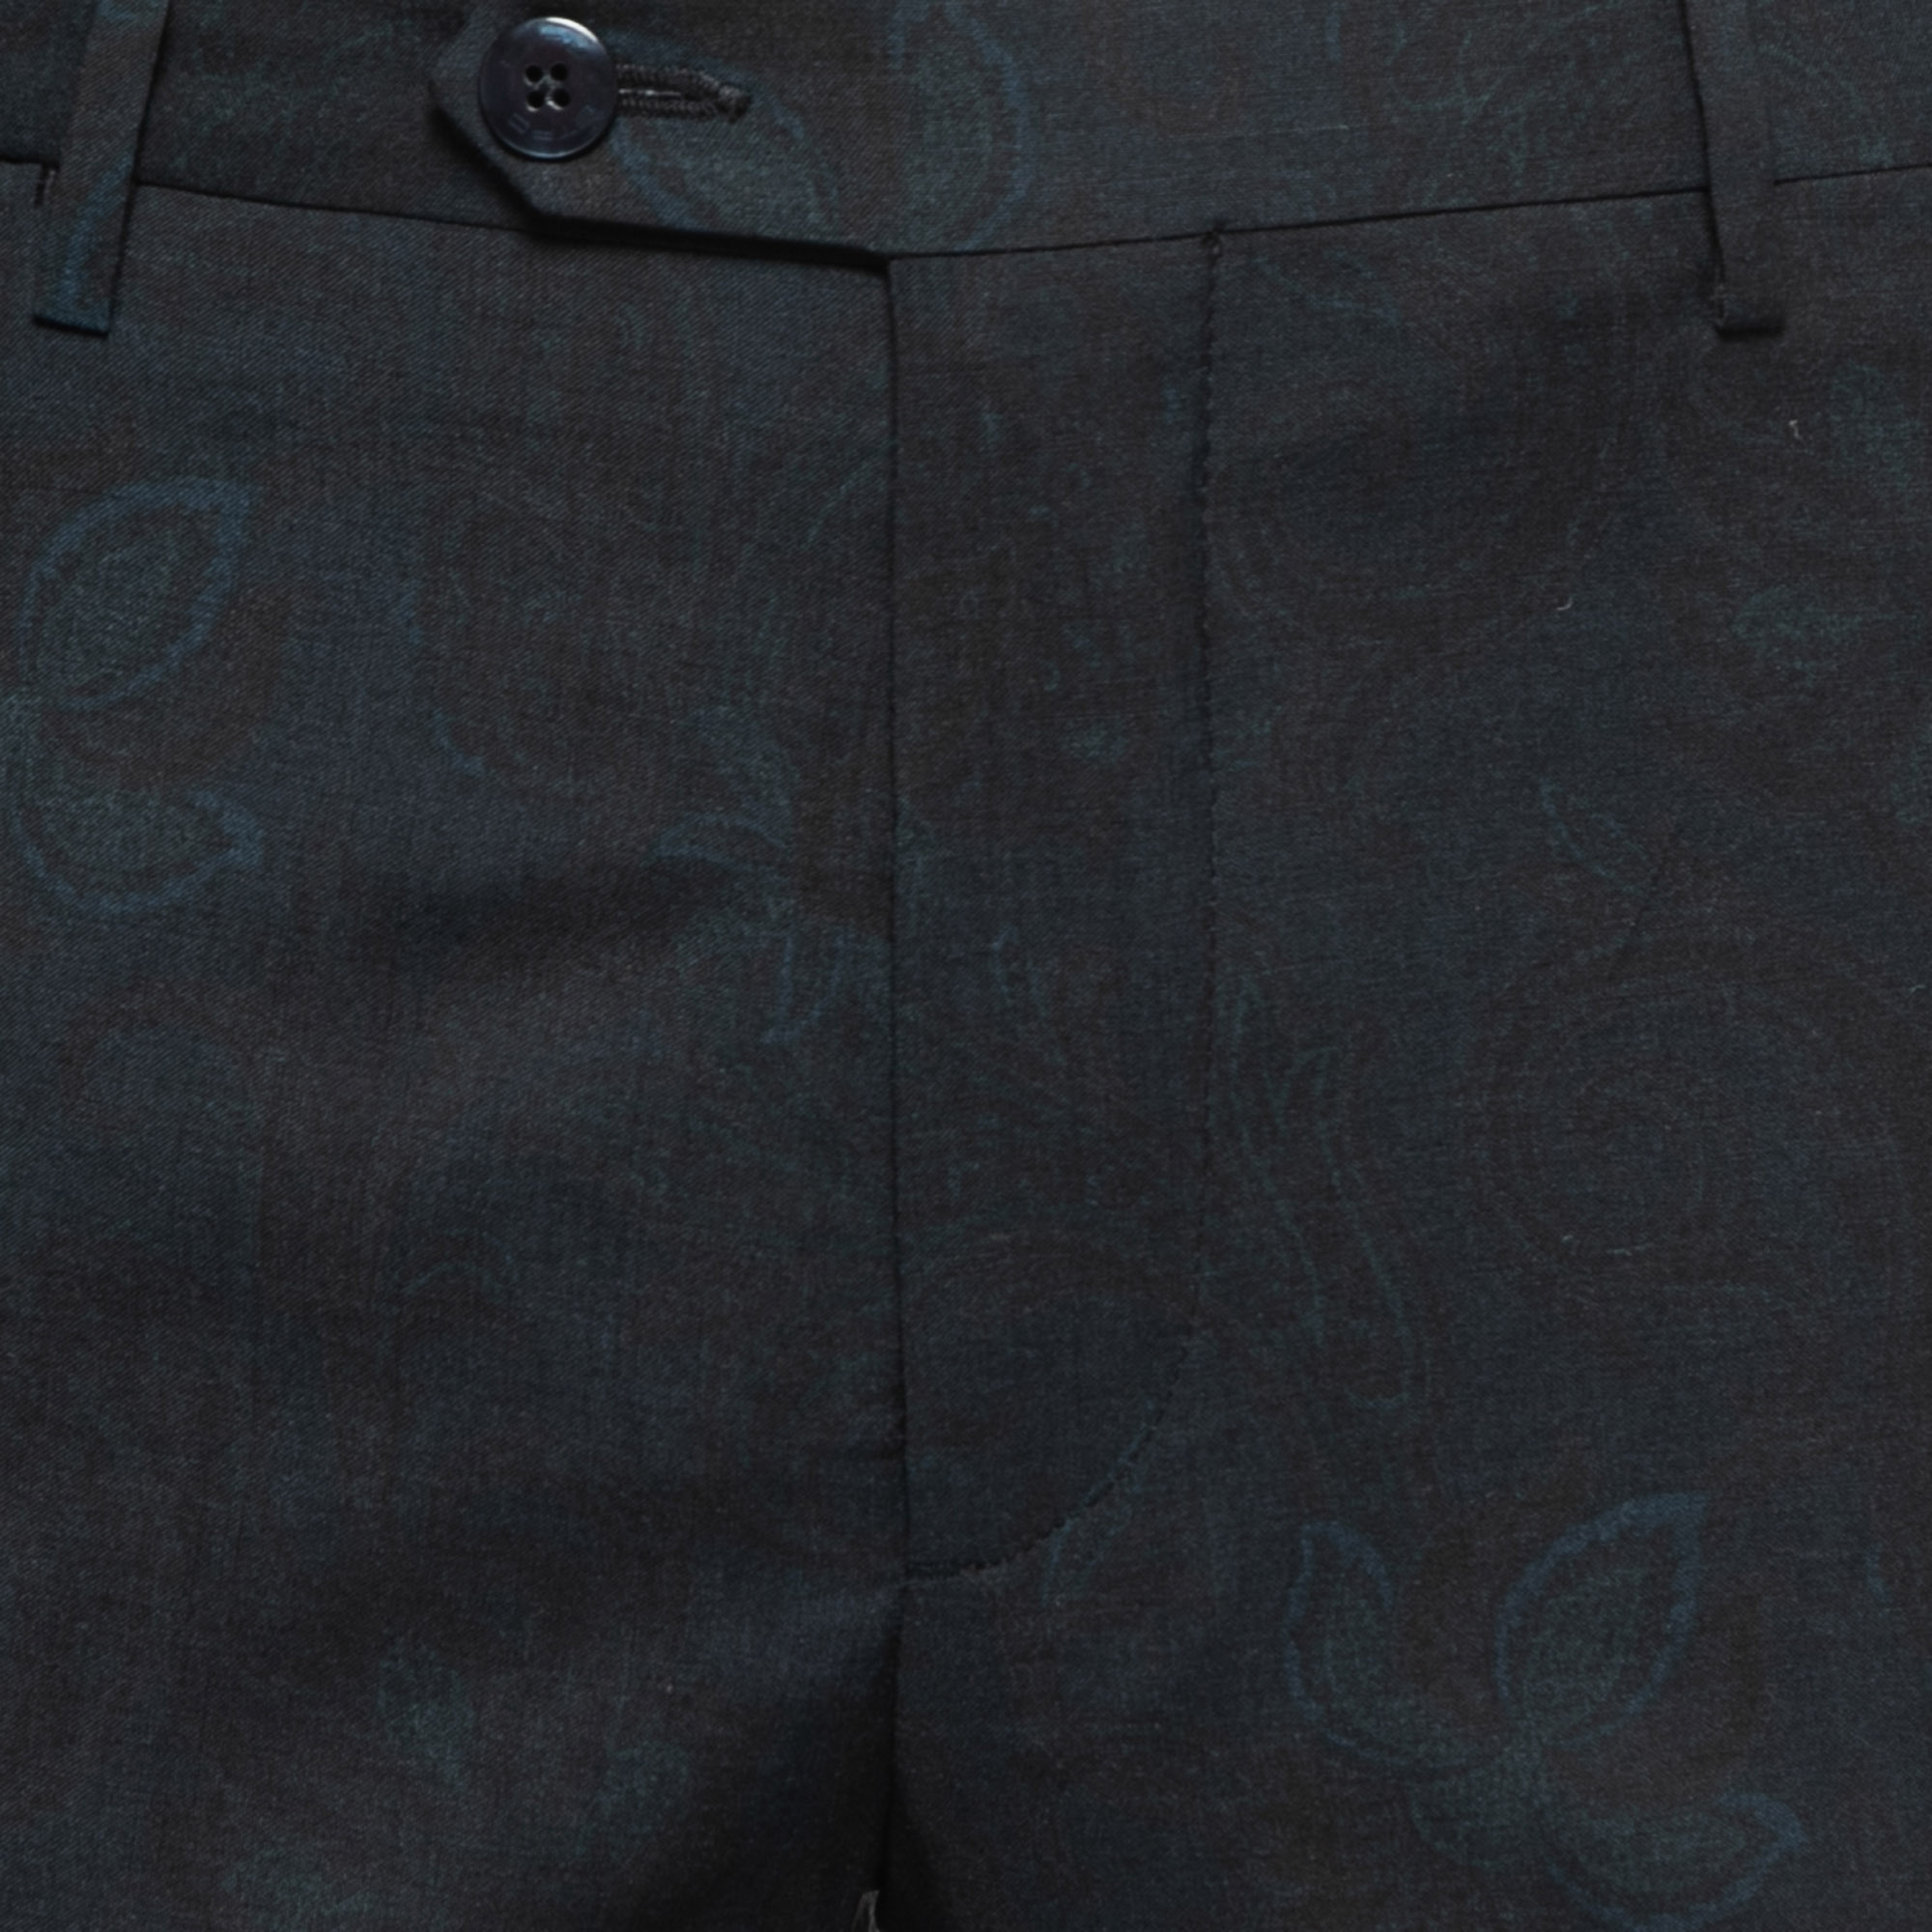 Etro Navy Blue Paisley Patterned Wool Tailored Pants L